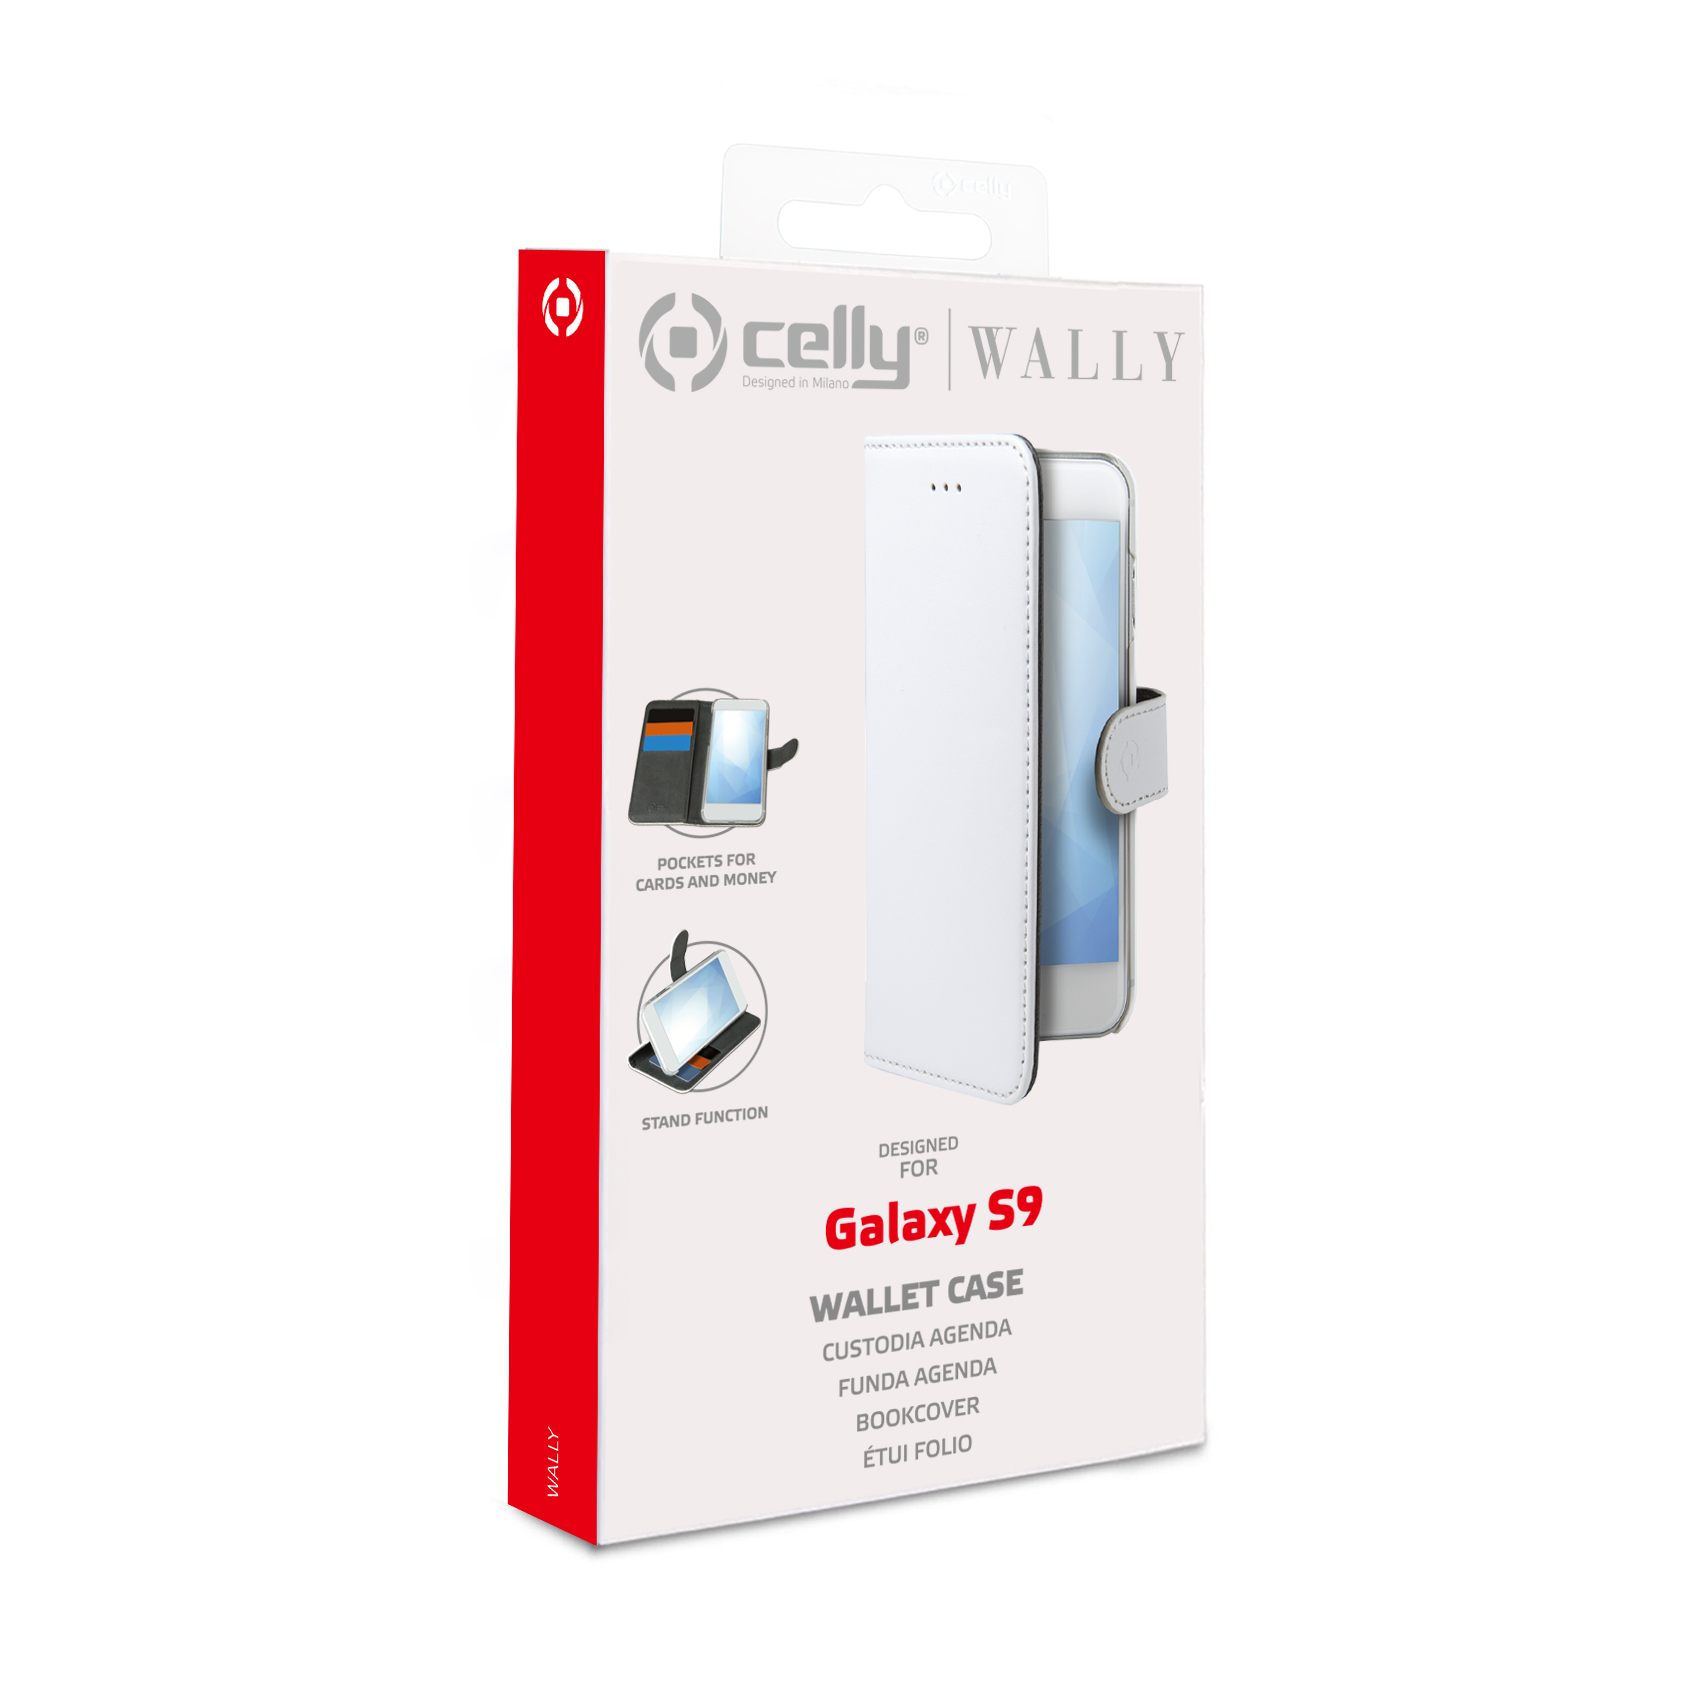 Wally Case Galaxy S9 White Celly Wally790wh 8021735739685